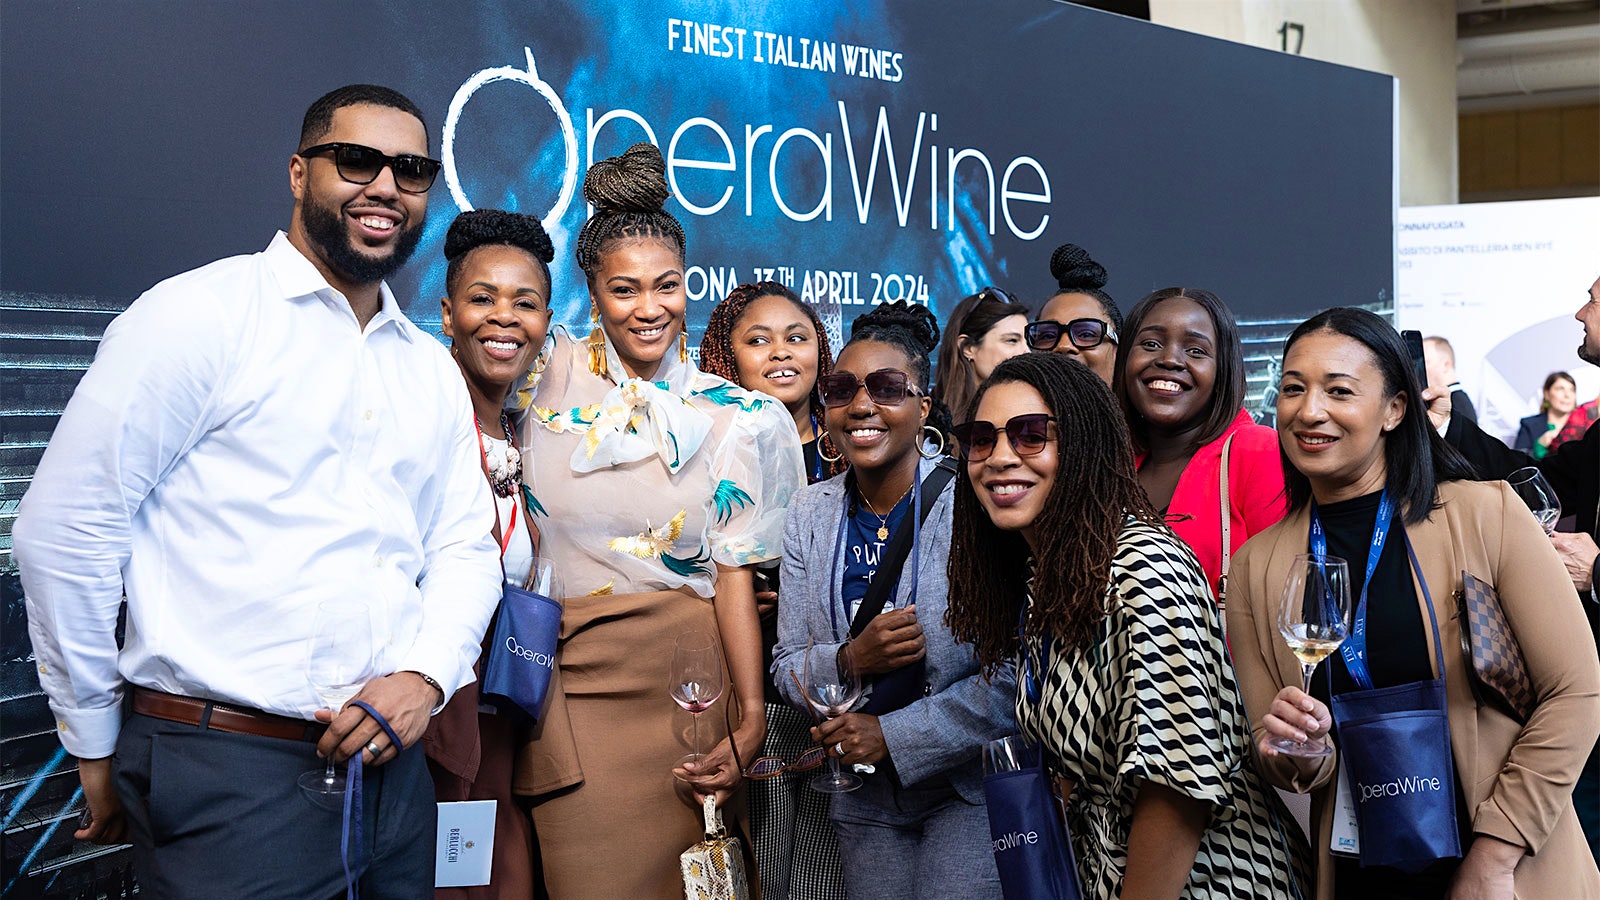  OperaWine guests pose at the entrance.